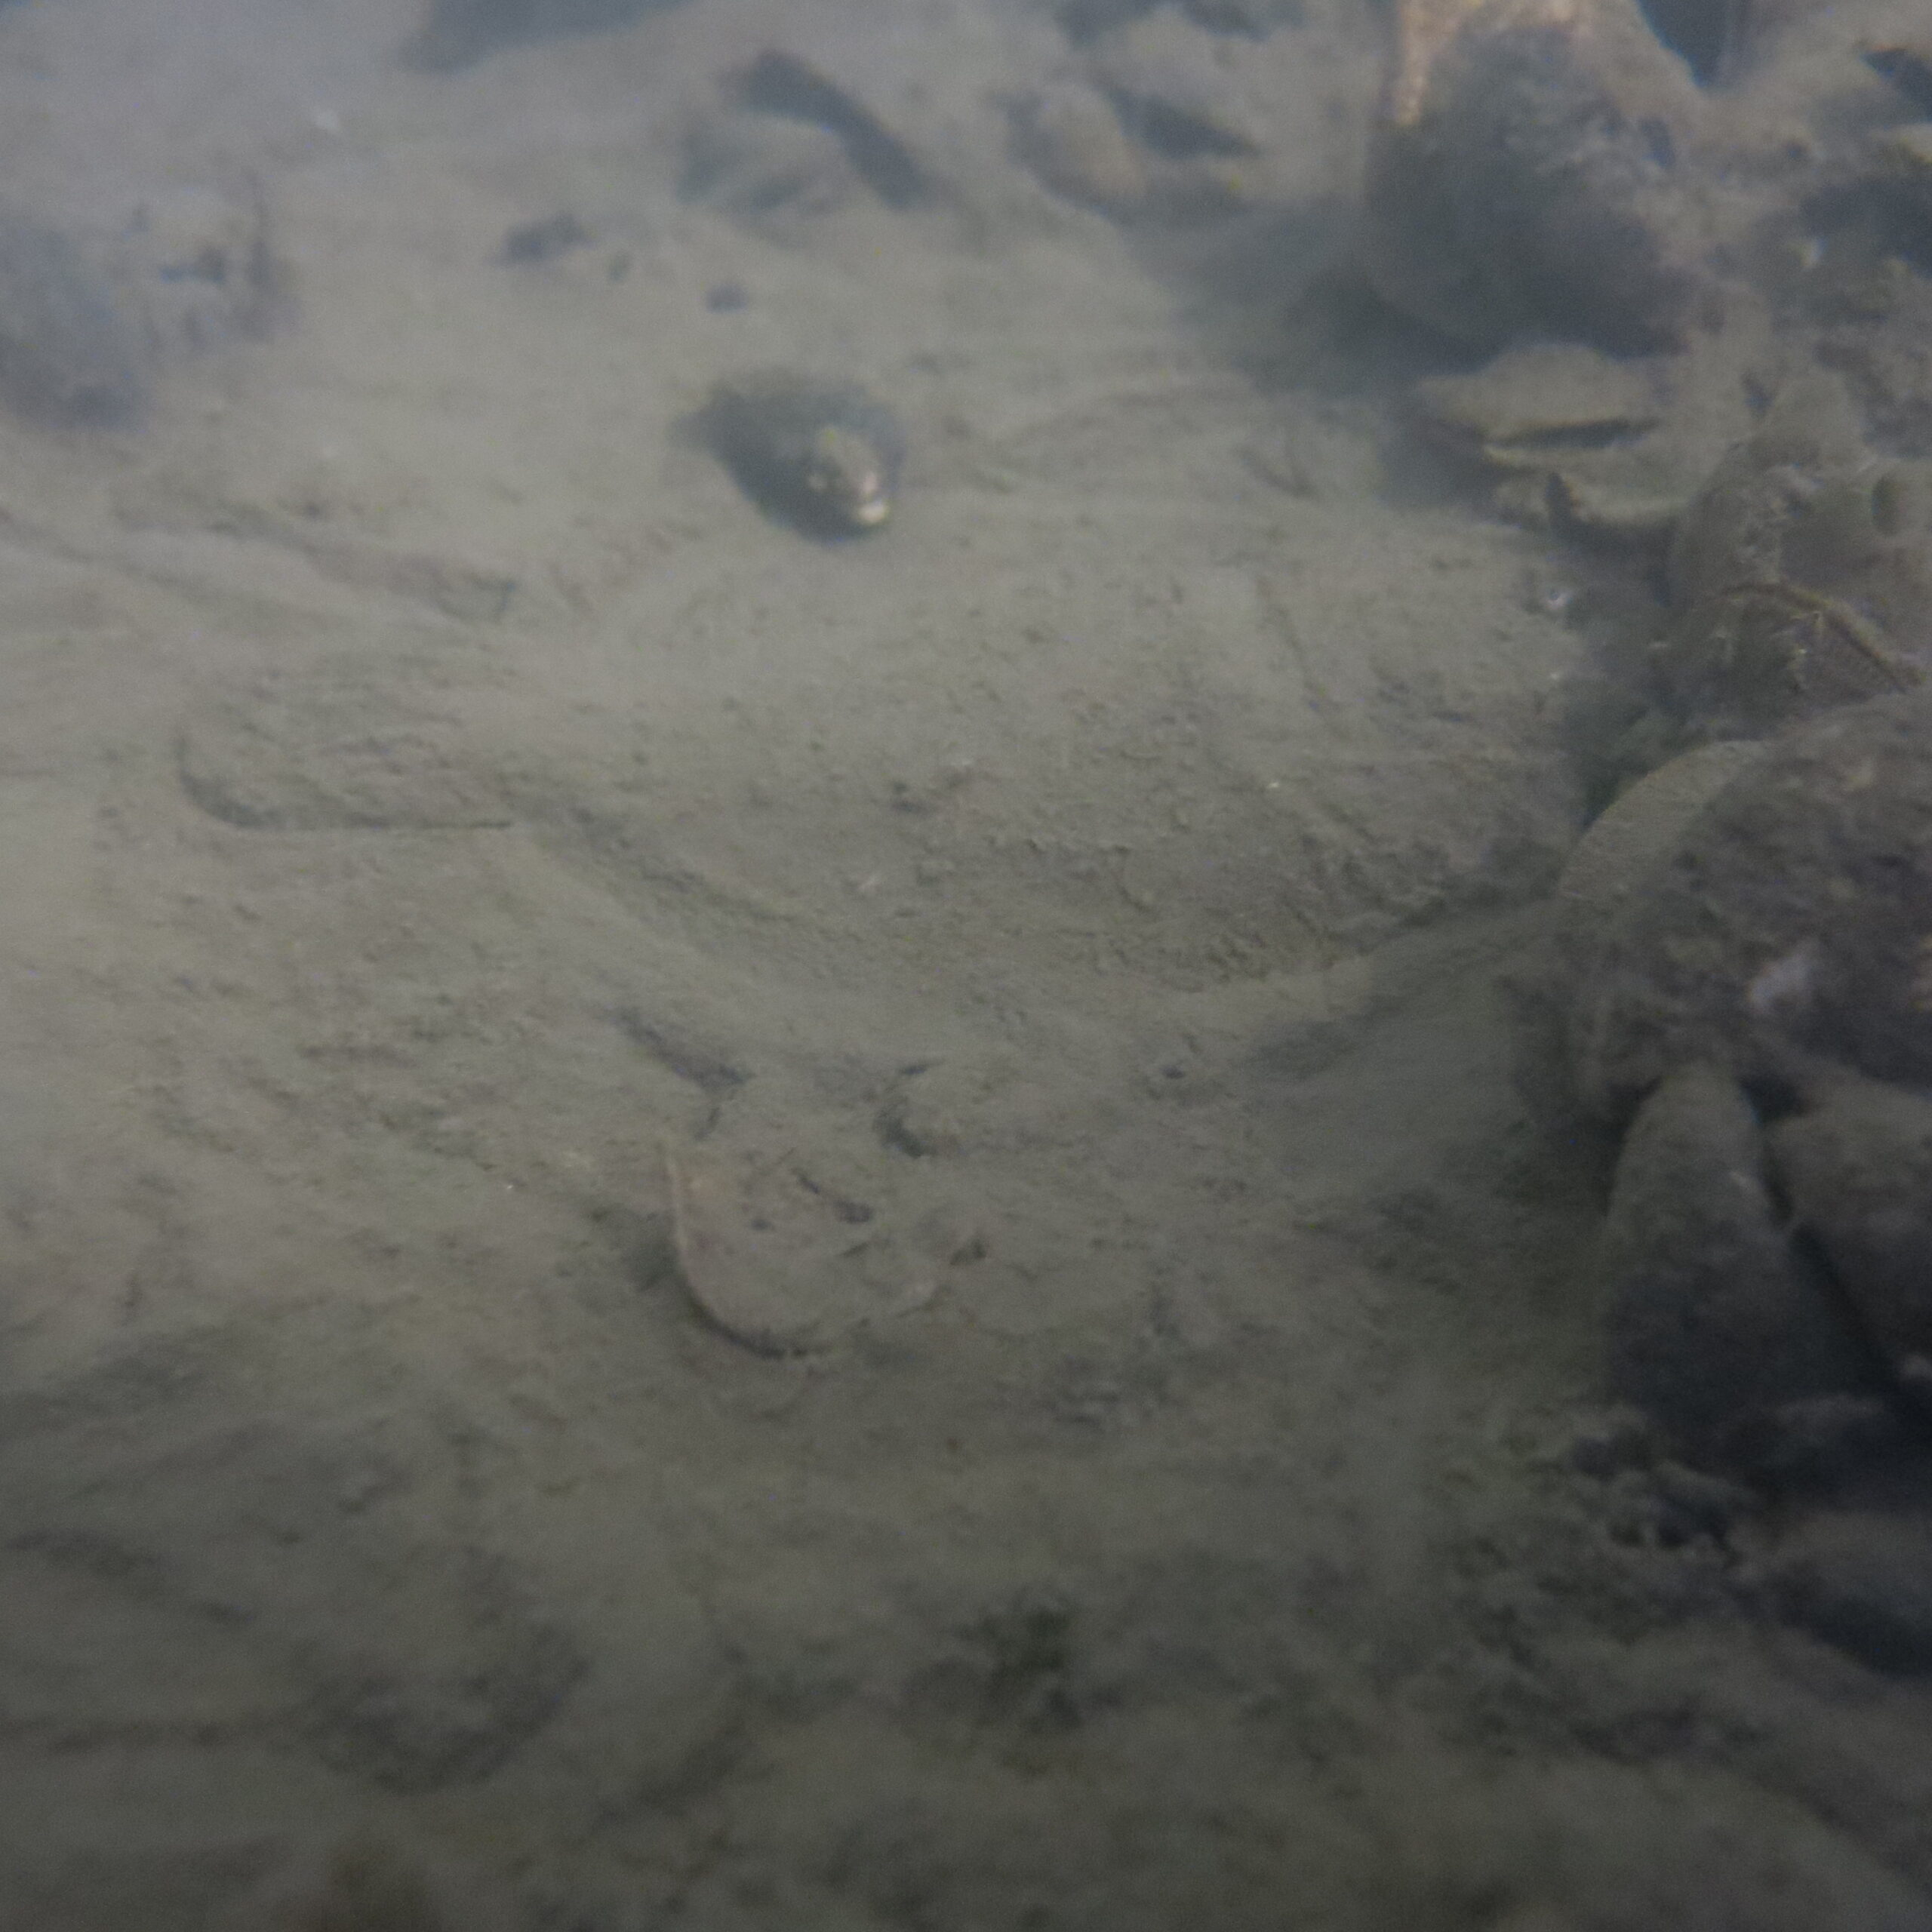 An outline of a hogchoker fish under the dirt on the river floor